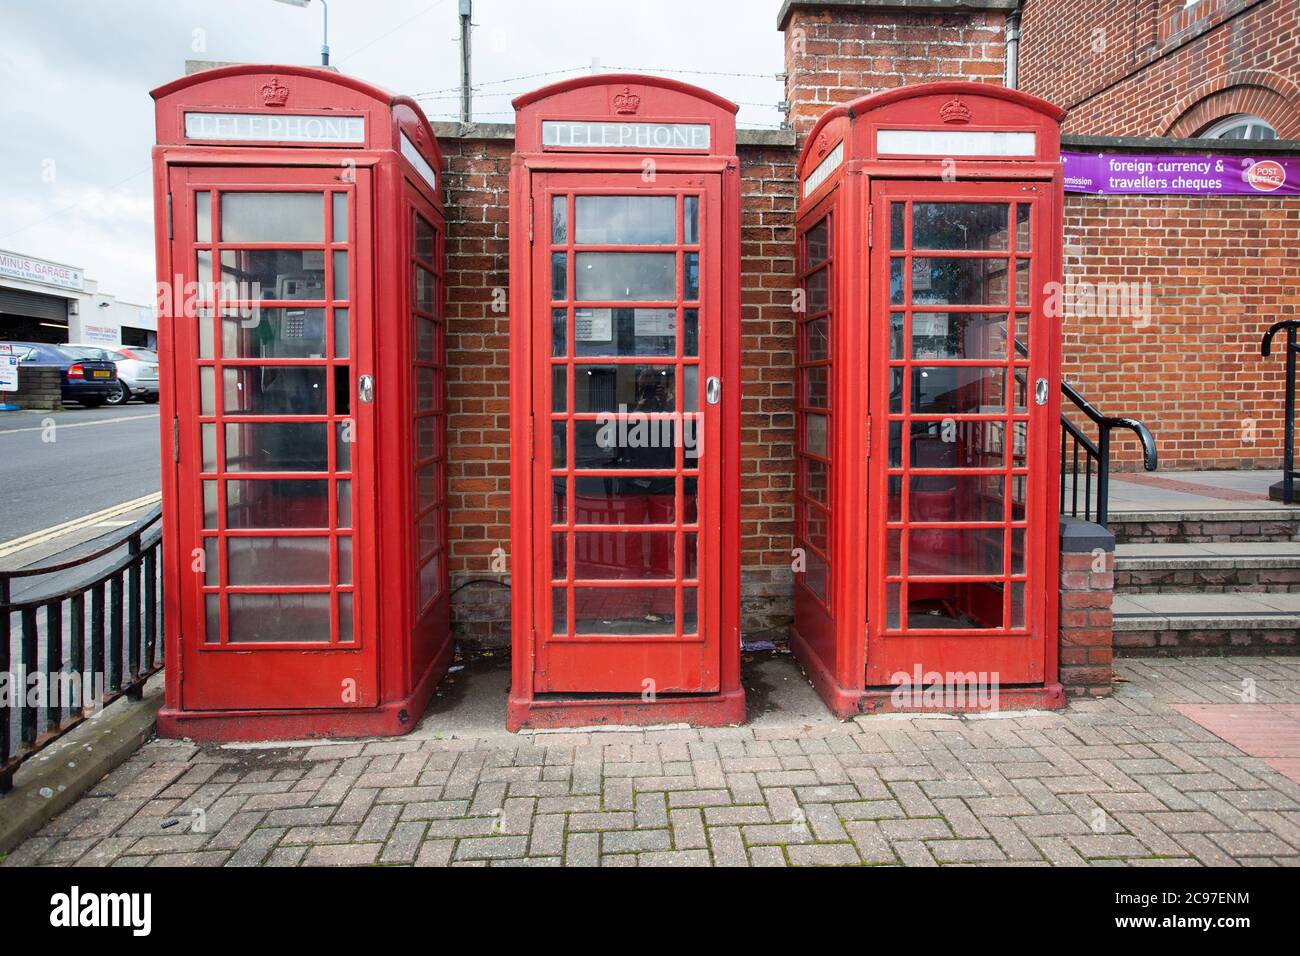 Three red phonet boxes standing side by side on a street in the UK. Stock Photo